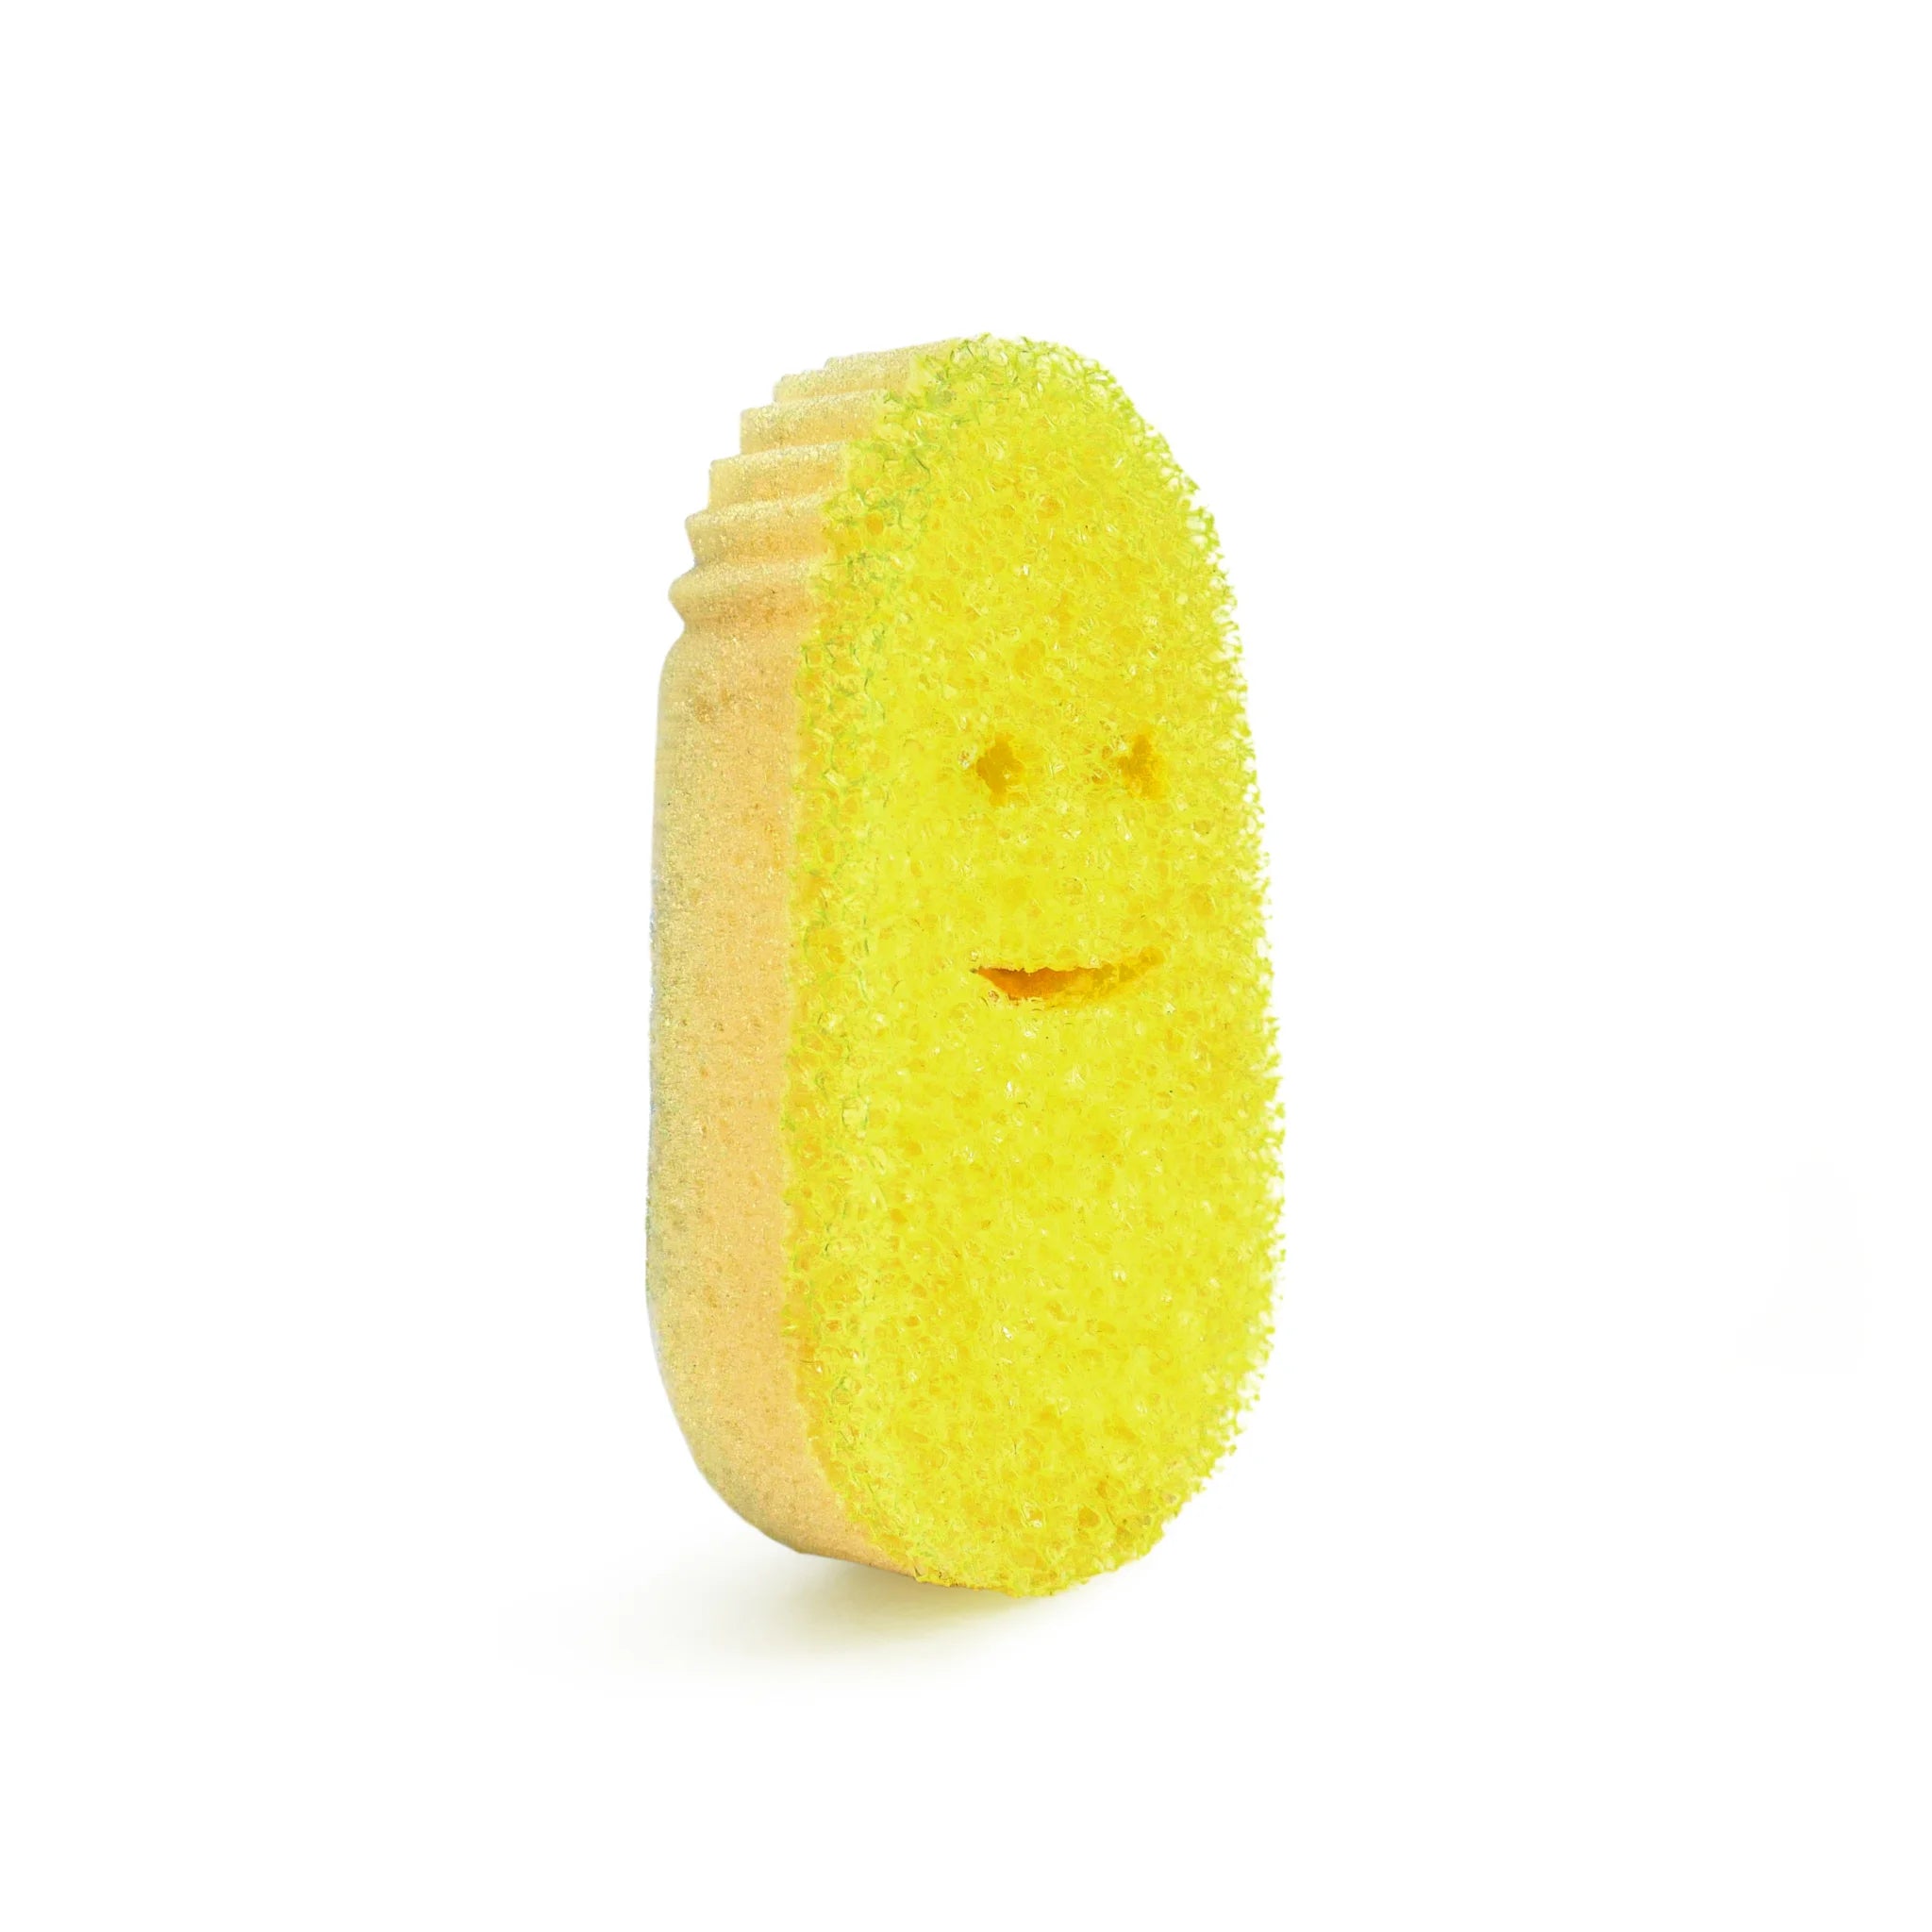 Cleaning | Scrub Daddy Dishwand Replace Head by Weirs of Baggot Street